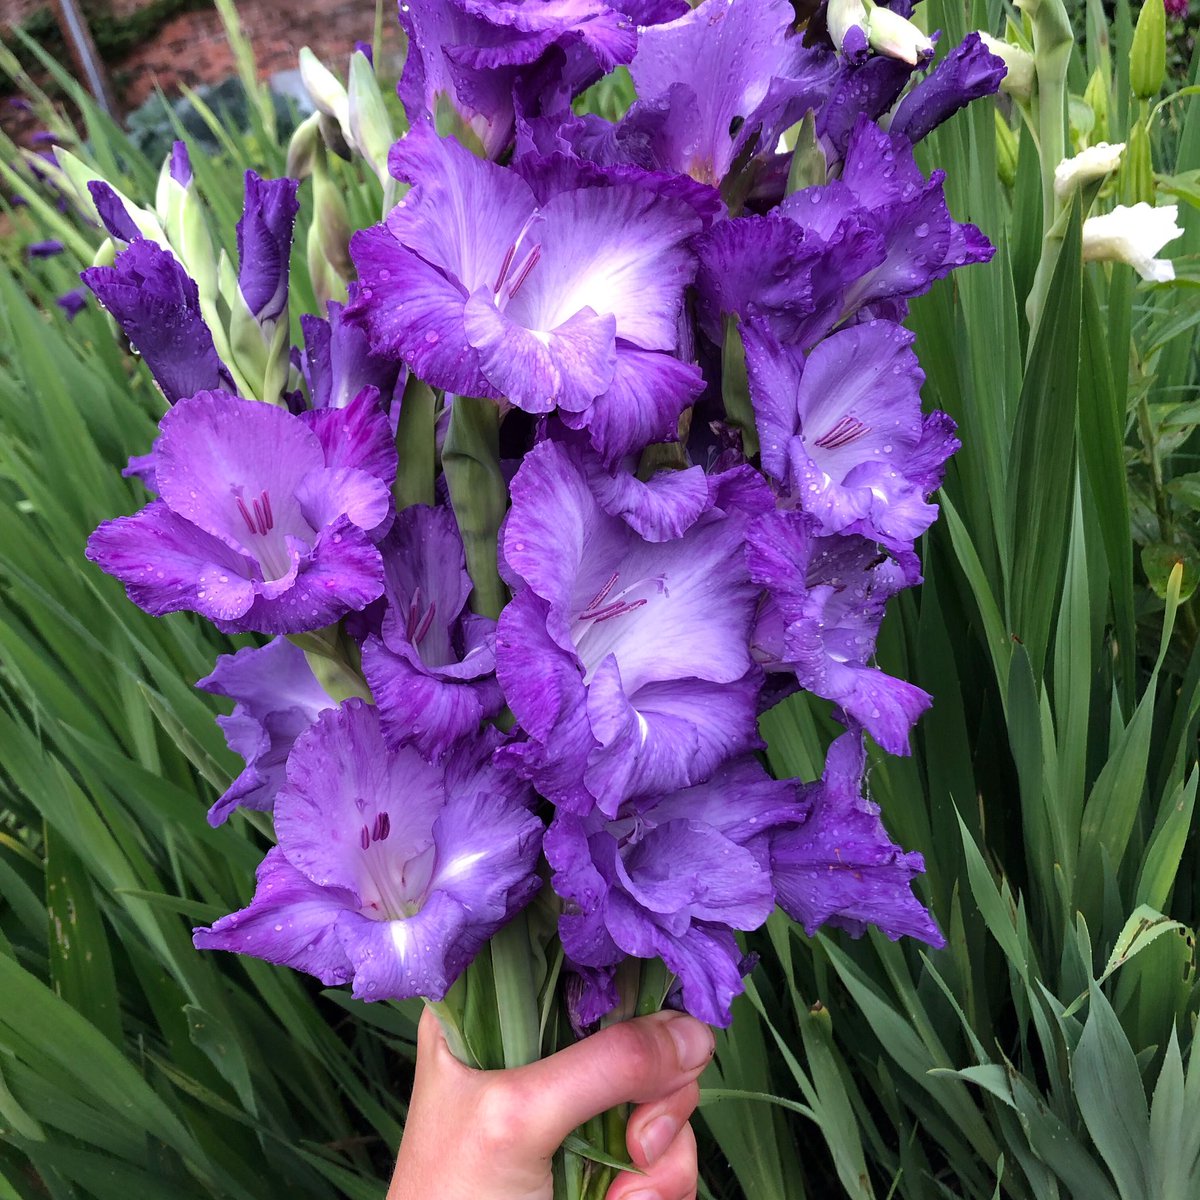 Does anyone find the gladioli as spectacular as I do? The purple ones in my garden are always the first to bloom. Wishing you a lovely weekend!
#gladiolus #gladiola #gladioli #flowers #cuttingflowers #spectacular #purple #rainyday #goodforthegarden #happyweekend